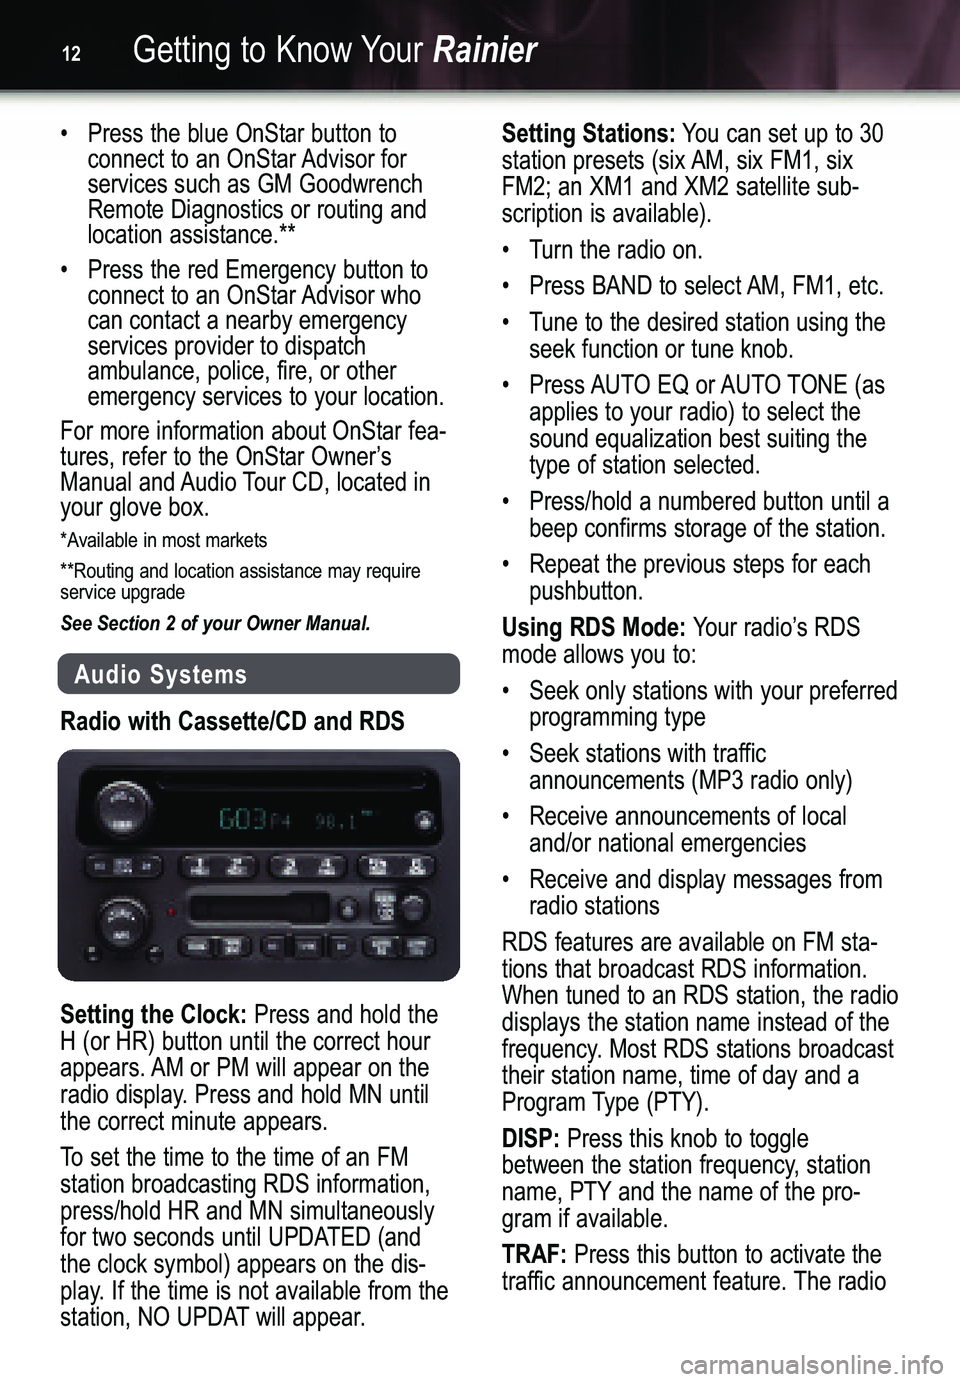 BUICK RAINIER 2005  Get To Know Guide Getting to Know YourRainier12
•  Press the blue OnStar button to 
connect to an OnStar Advisor for services such as GM Goodwrench Remote Diagnostics or routing and location assistance.**
•  Press 